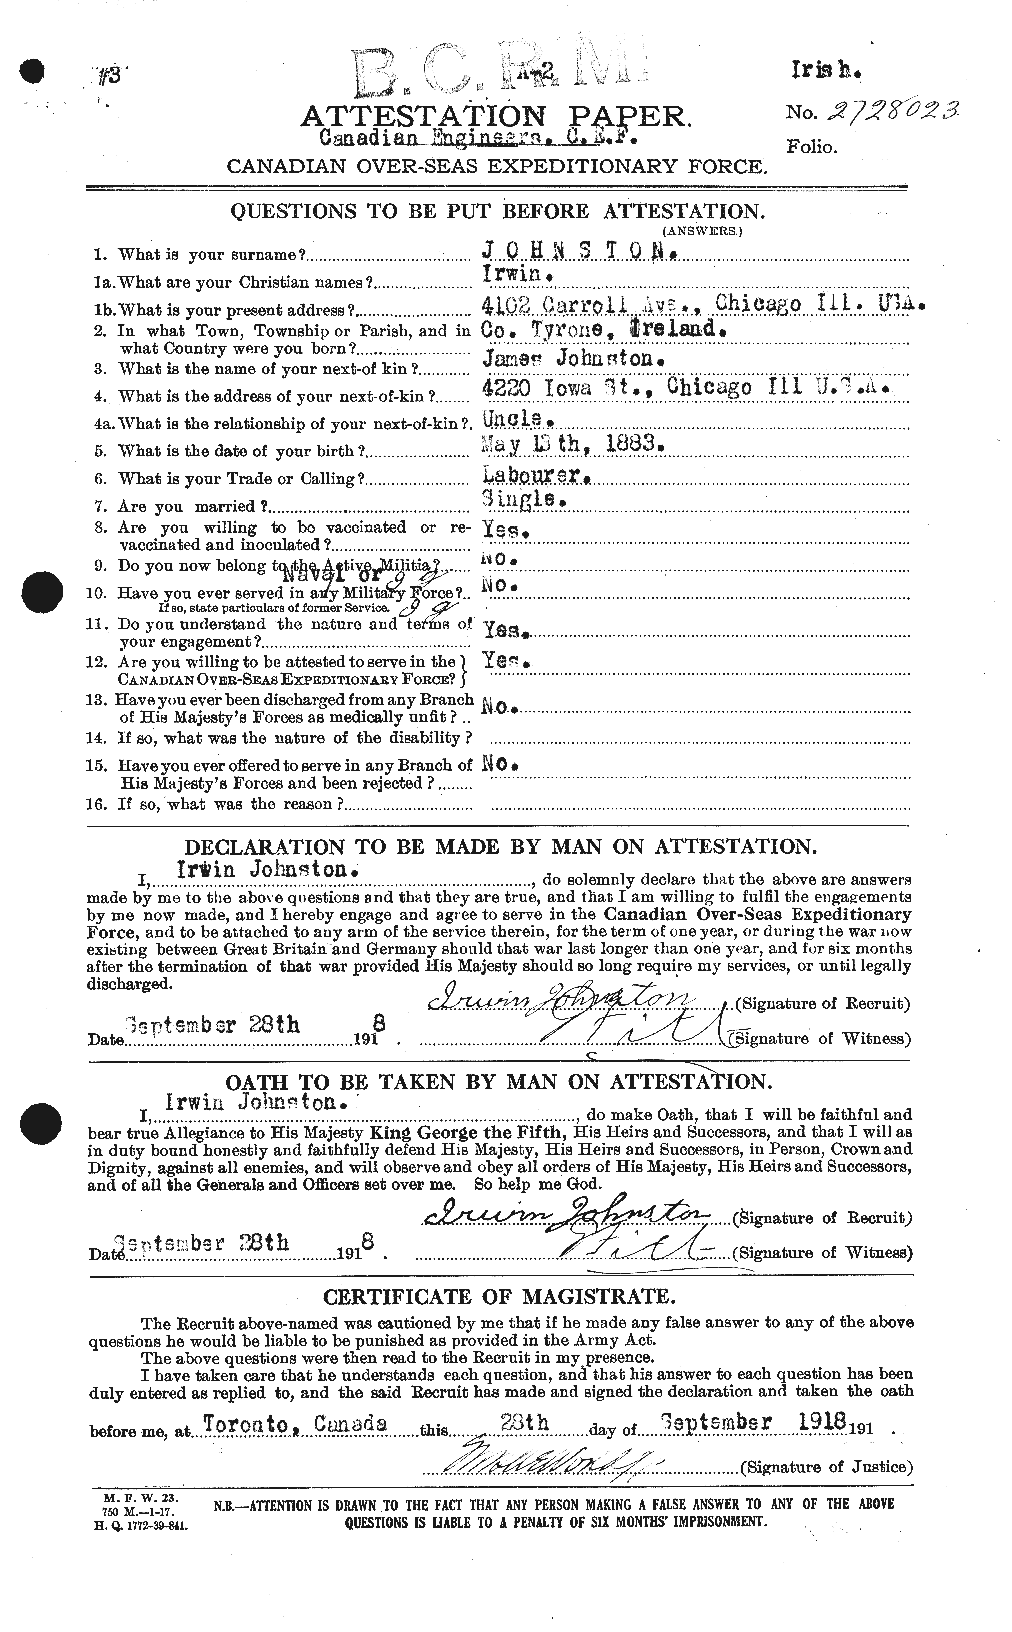 Personnel Records of the First World War - CEF 422674a